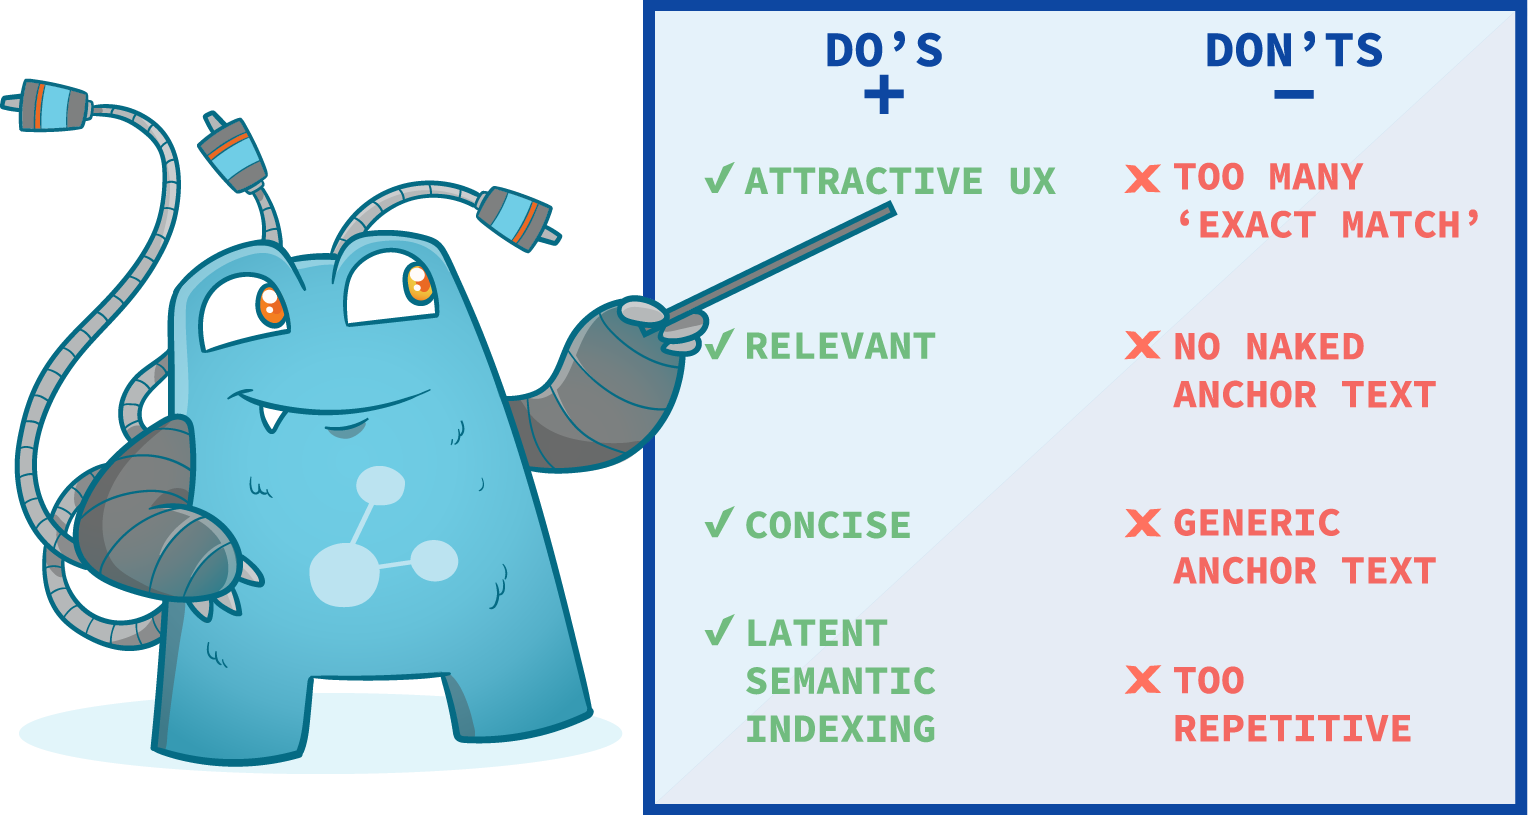 Do's and Don'ts when choosing the right anchor text type. Do's: Attractive UX, relevant, concise, latent semantic indexing. Don'ts: Too many 'exact match', no naked anchor text, generic anchor text, too repetitive.